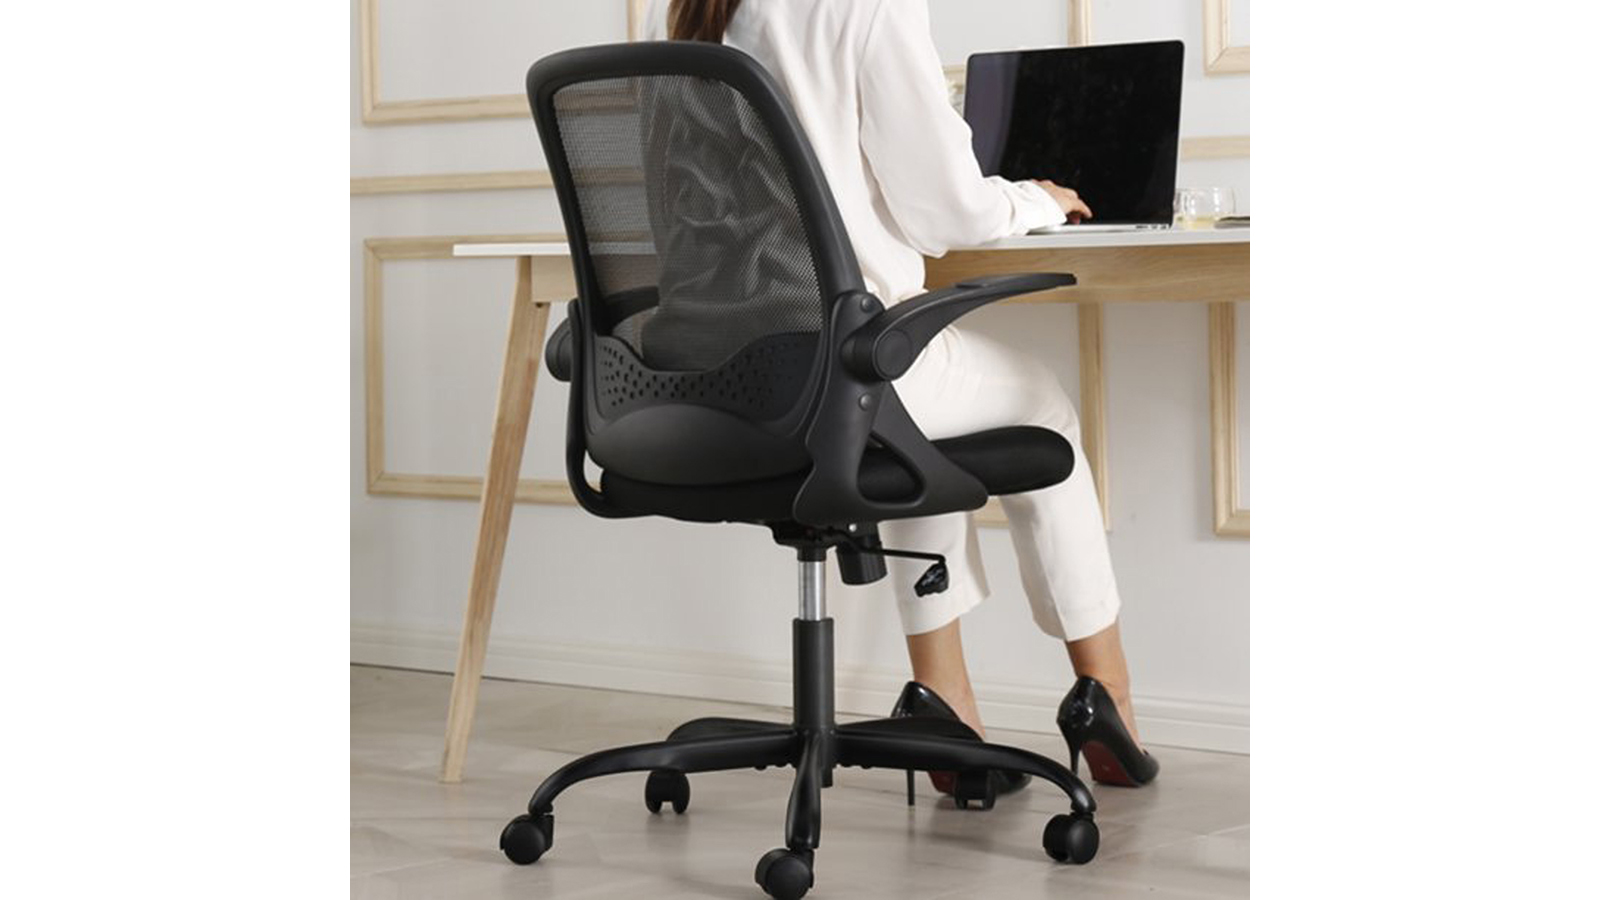 KERDOM Chair Curved Mesh Seats